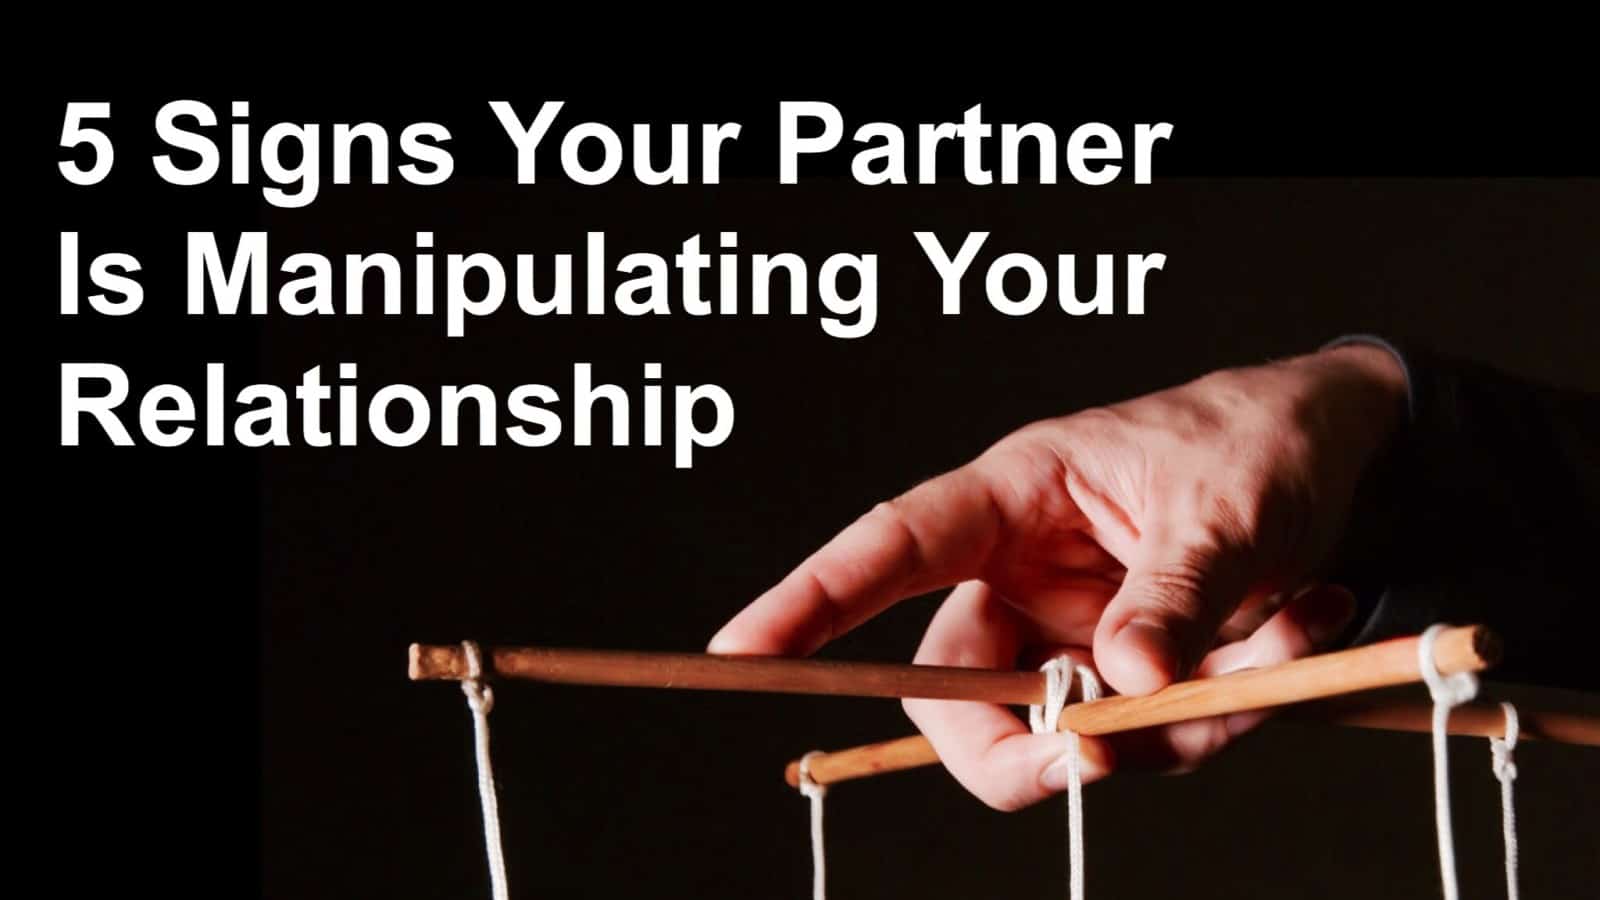 5 Signs Your Partner Is Manipulating Your Relationship